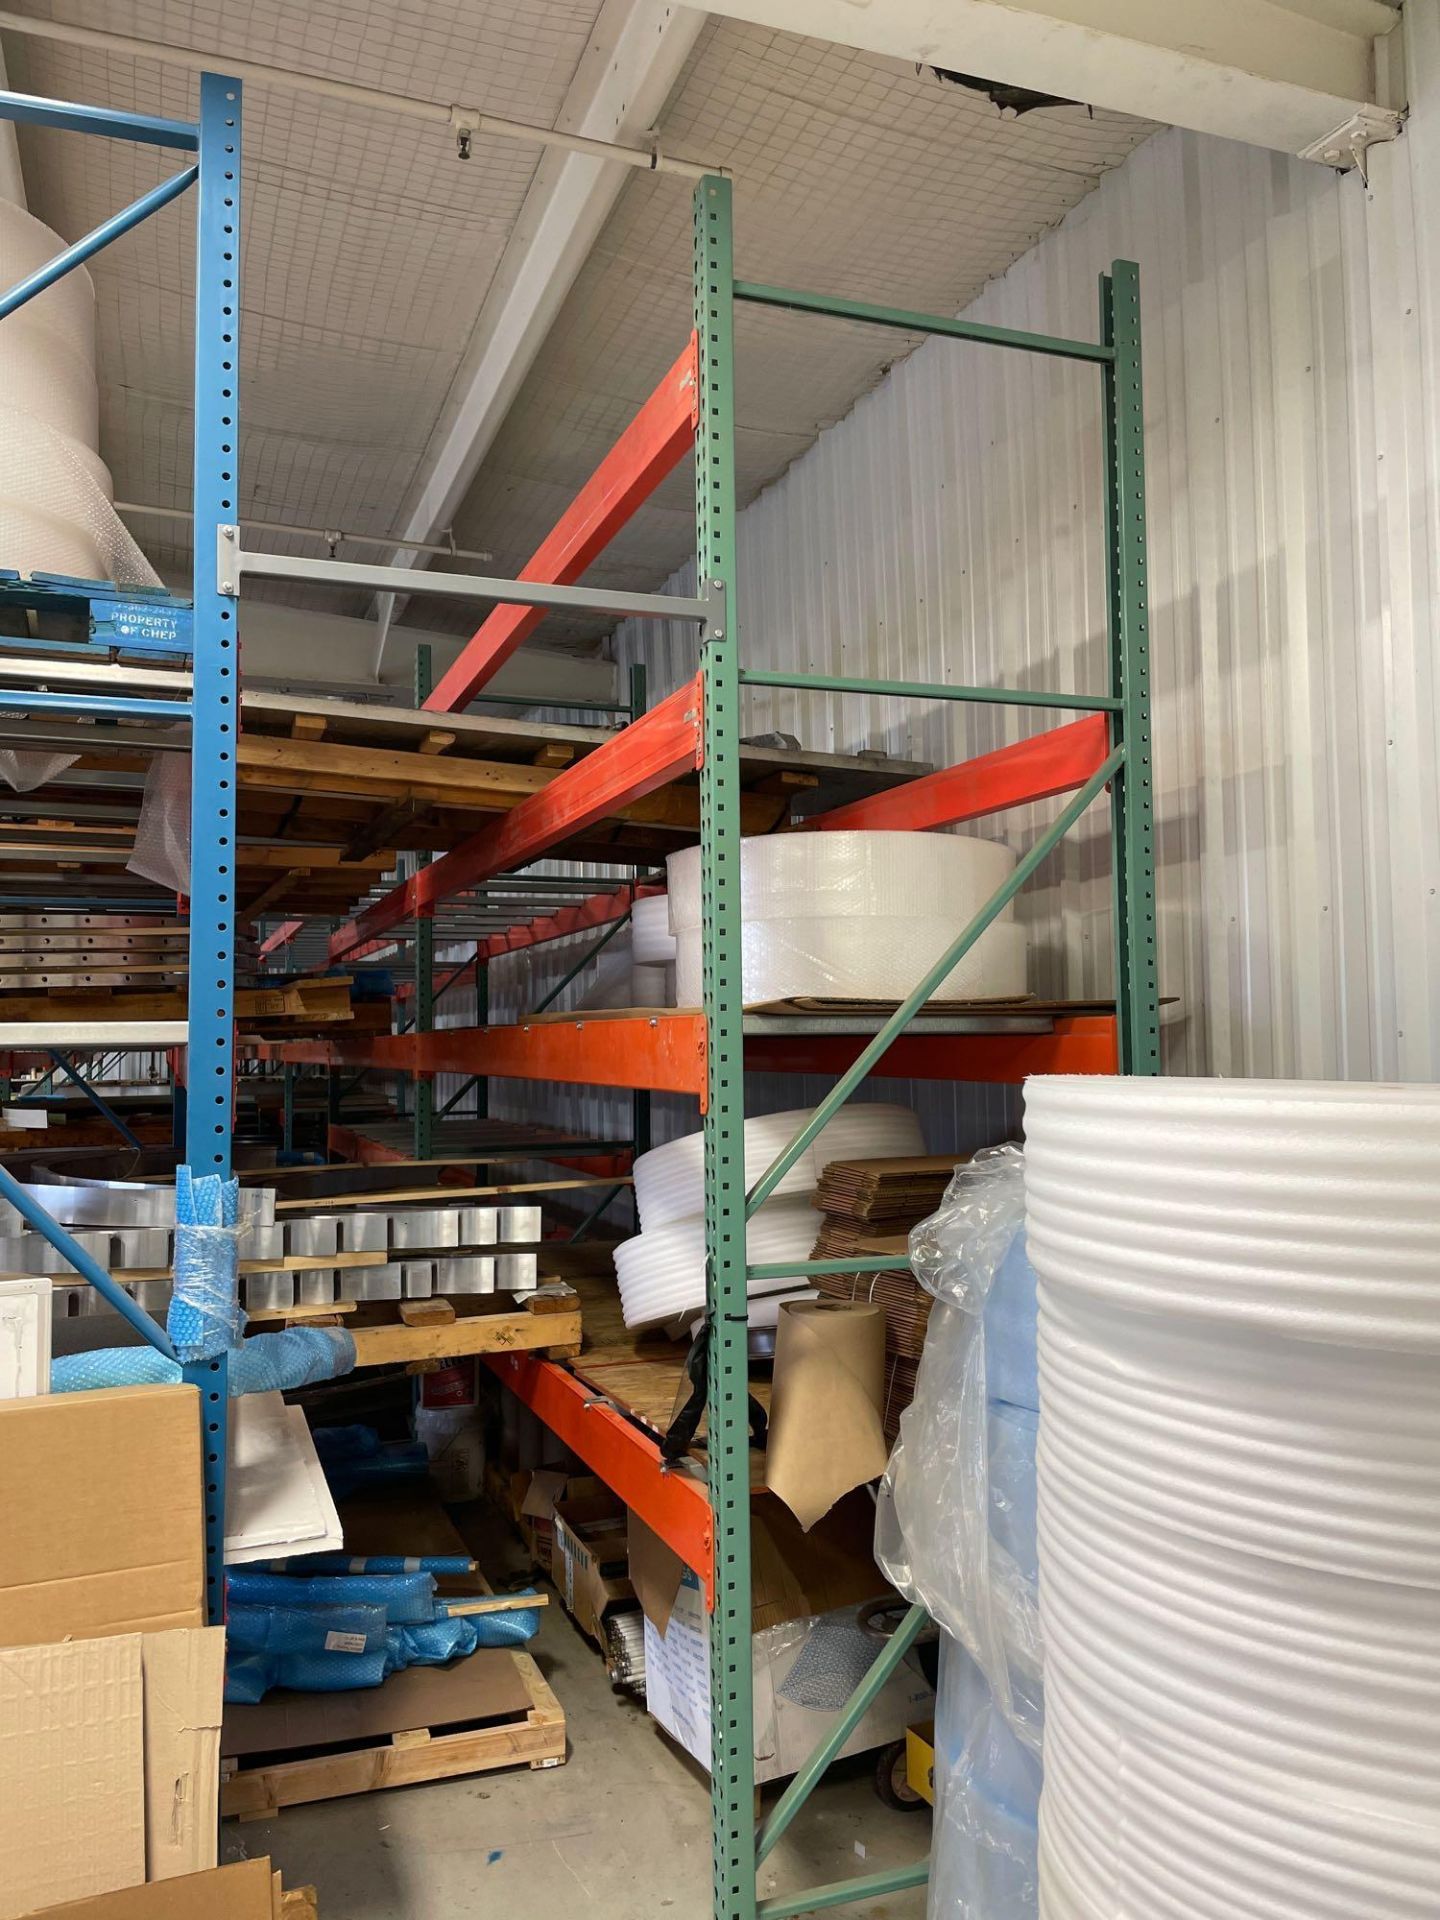 6 Sections Of Pallet Racks